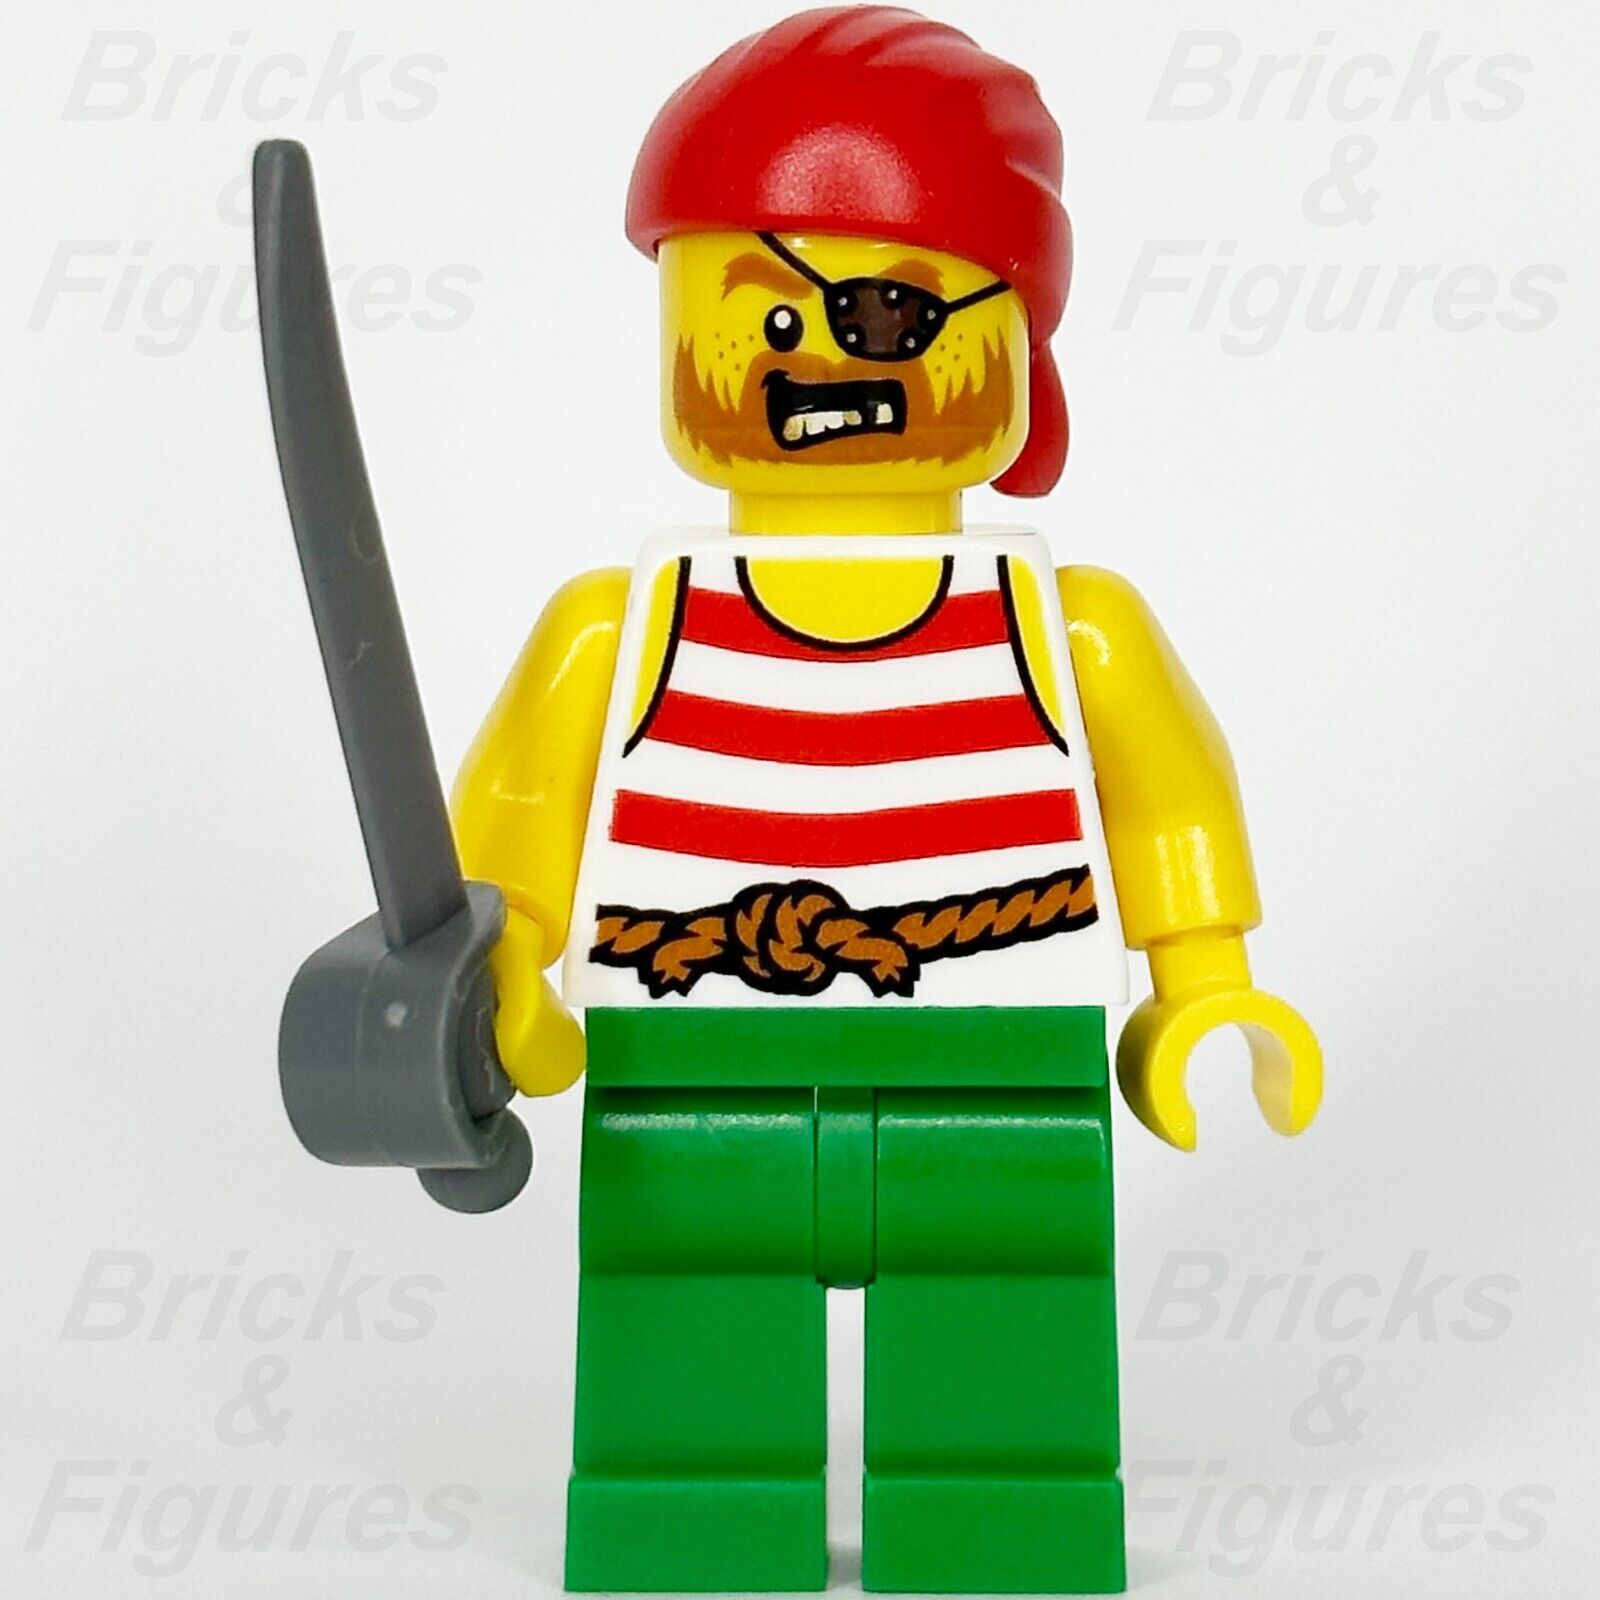 LEGO Pirate Minifigure Red Bandana Icons Pirates Imperial Soldiers 10320 pi190 - Bricks & Figures